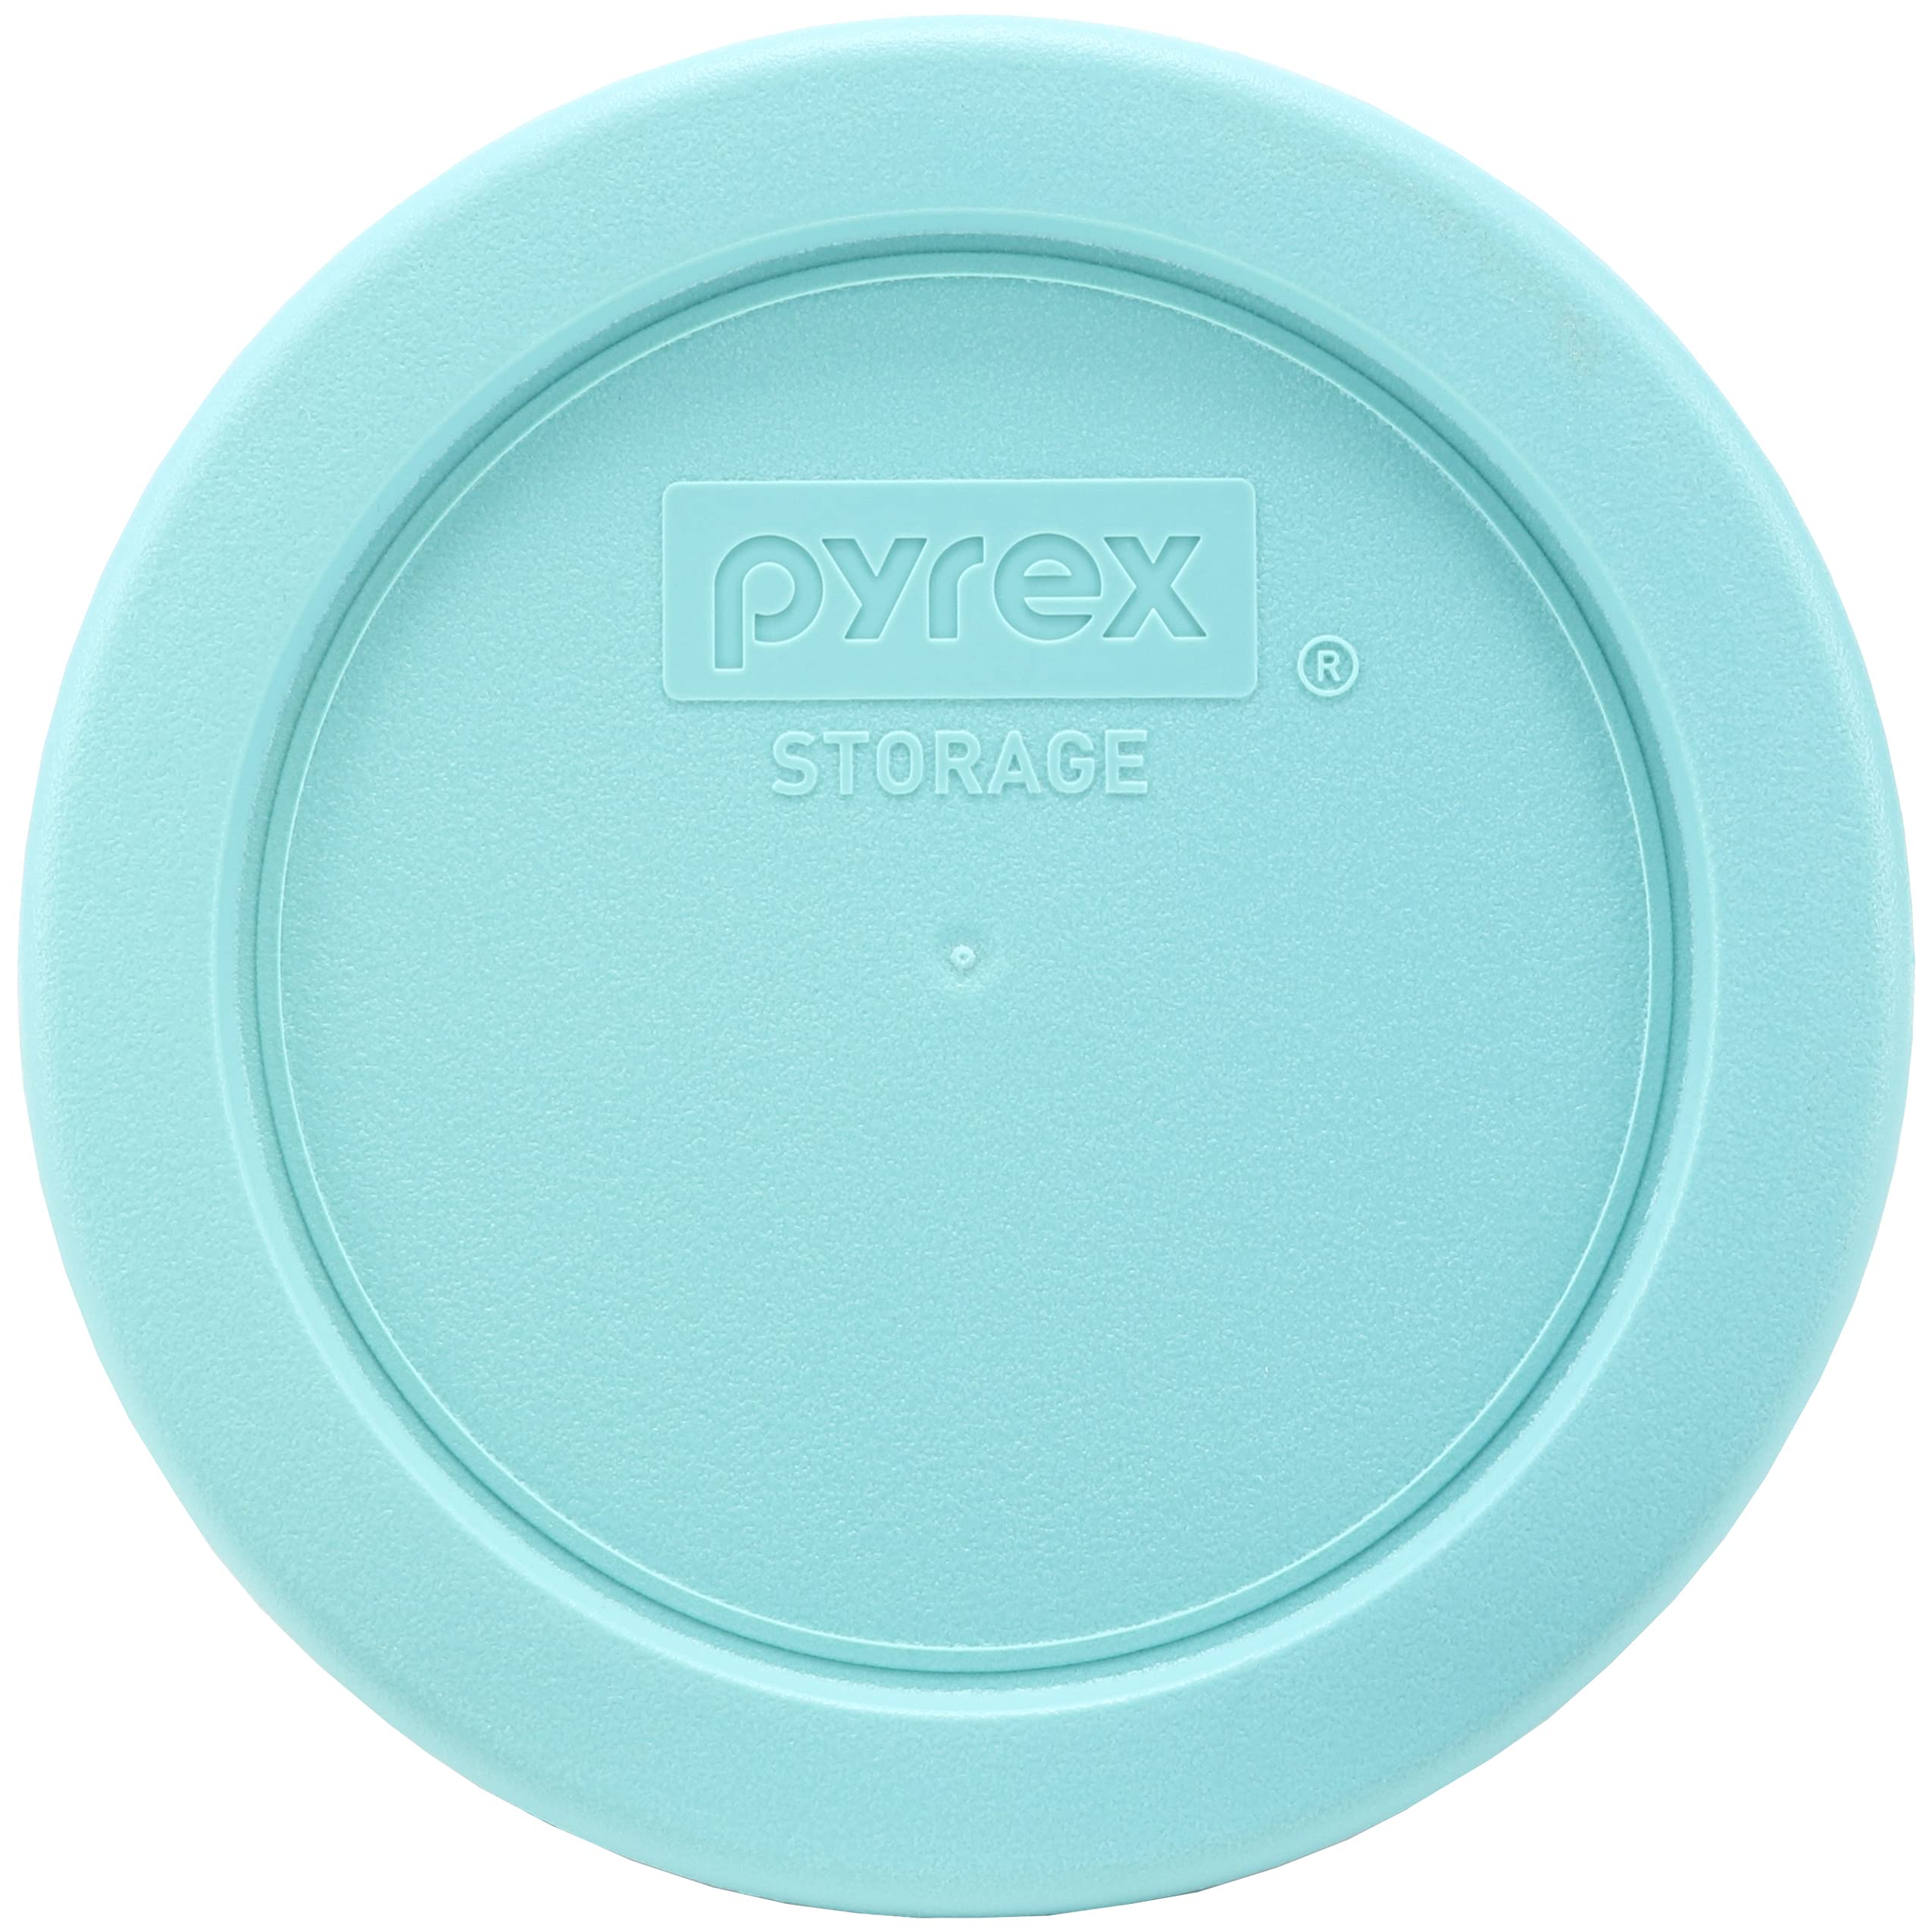 Pyrex 7202-PC Jade Dust Green Round Plastic Replacement Food Storage Lid, Made in USA - 2 pack